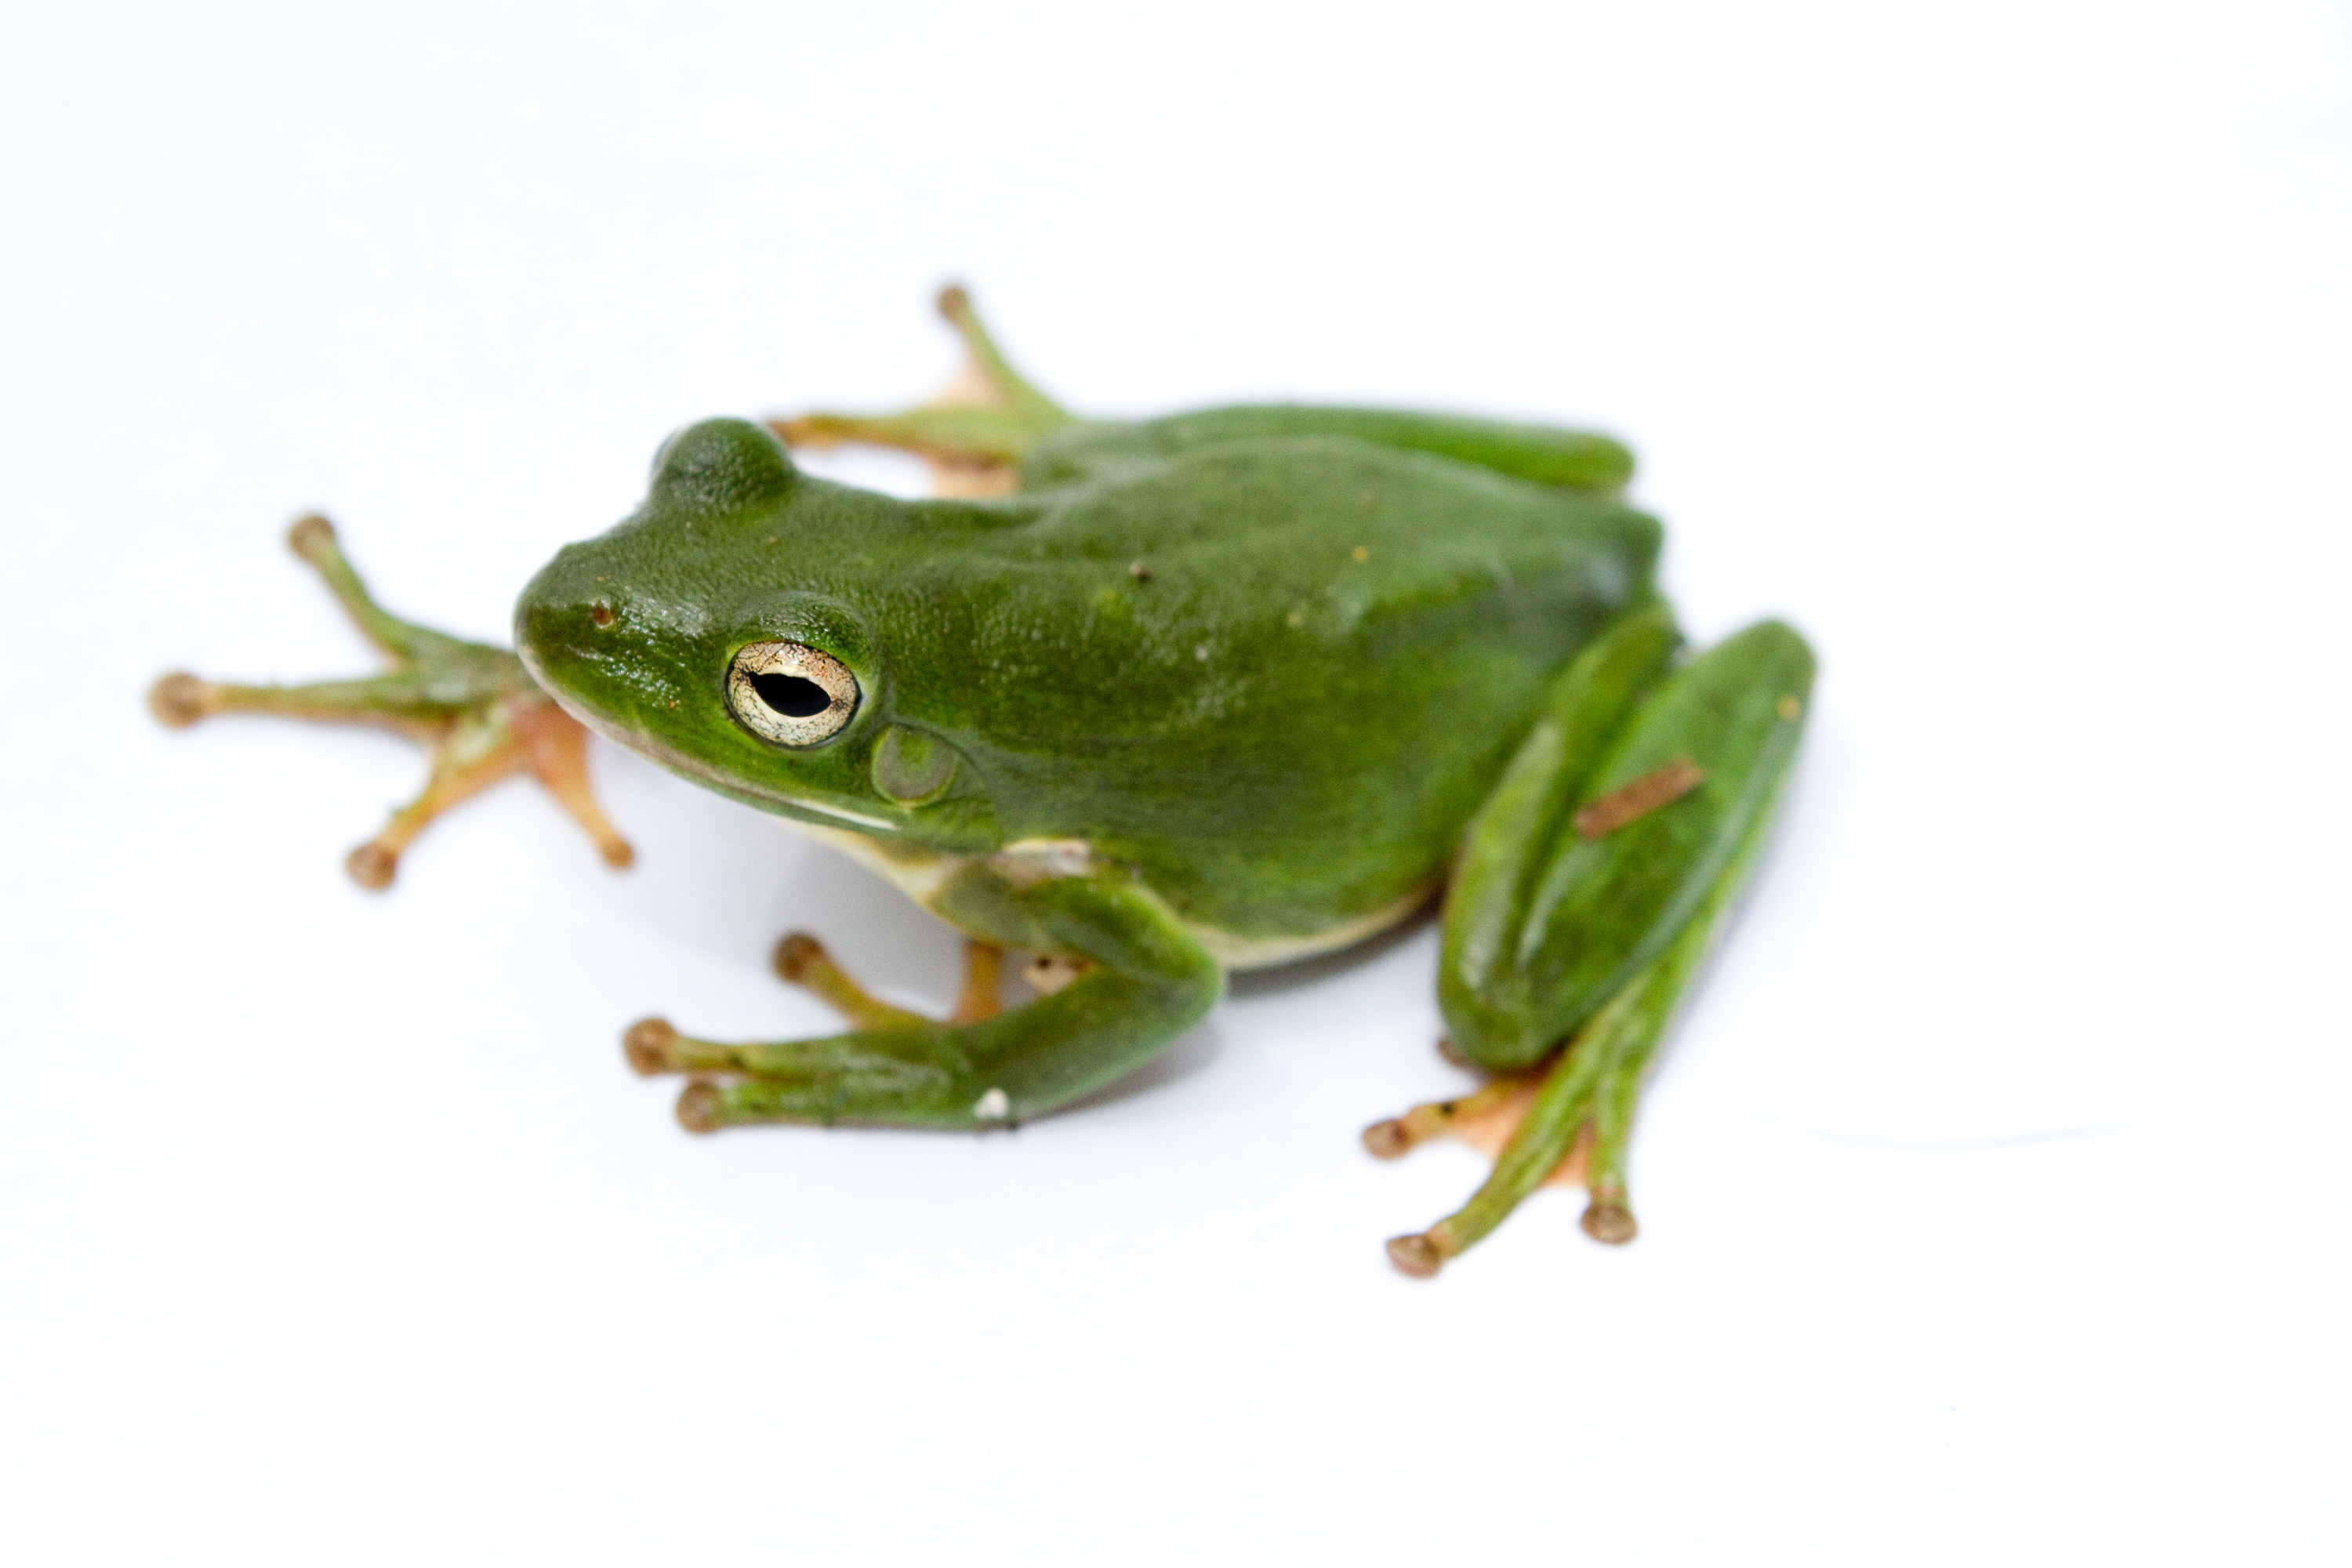 What is the green frog's name?